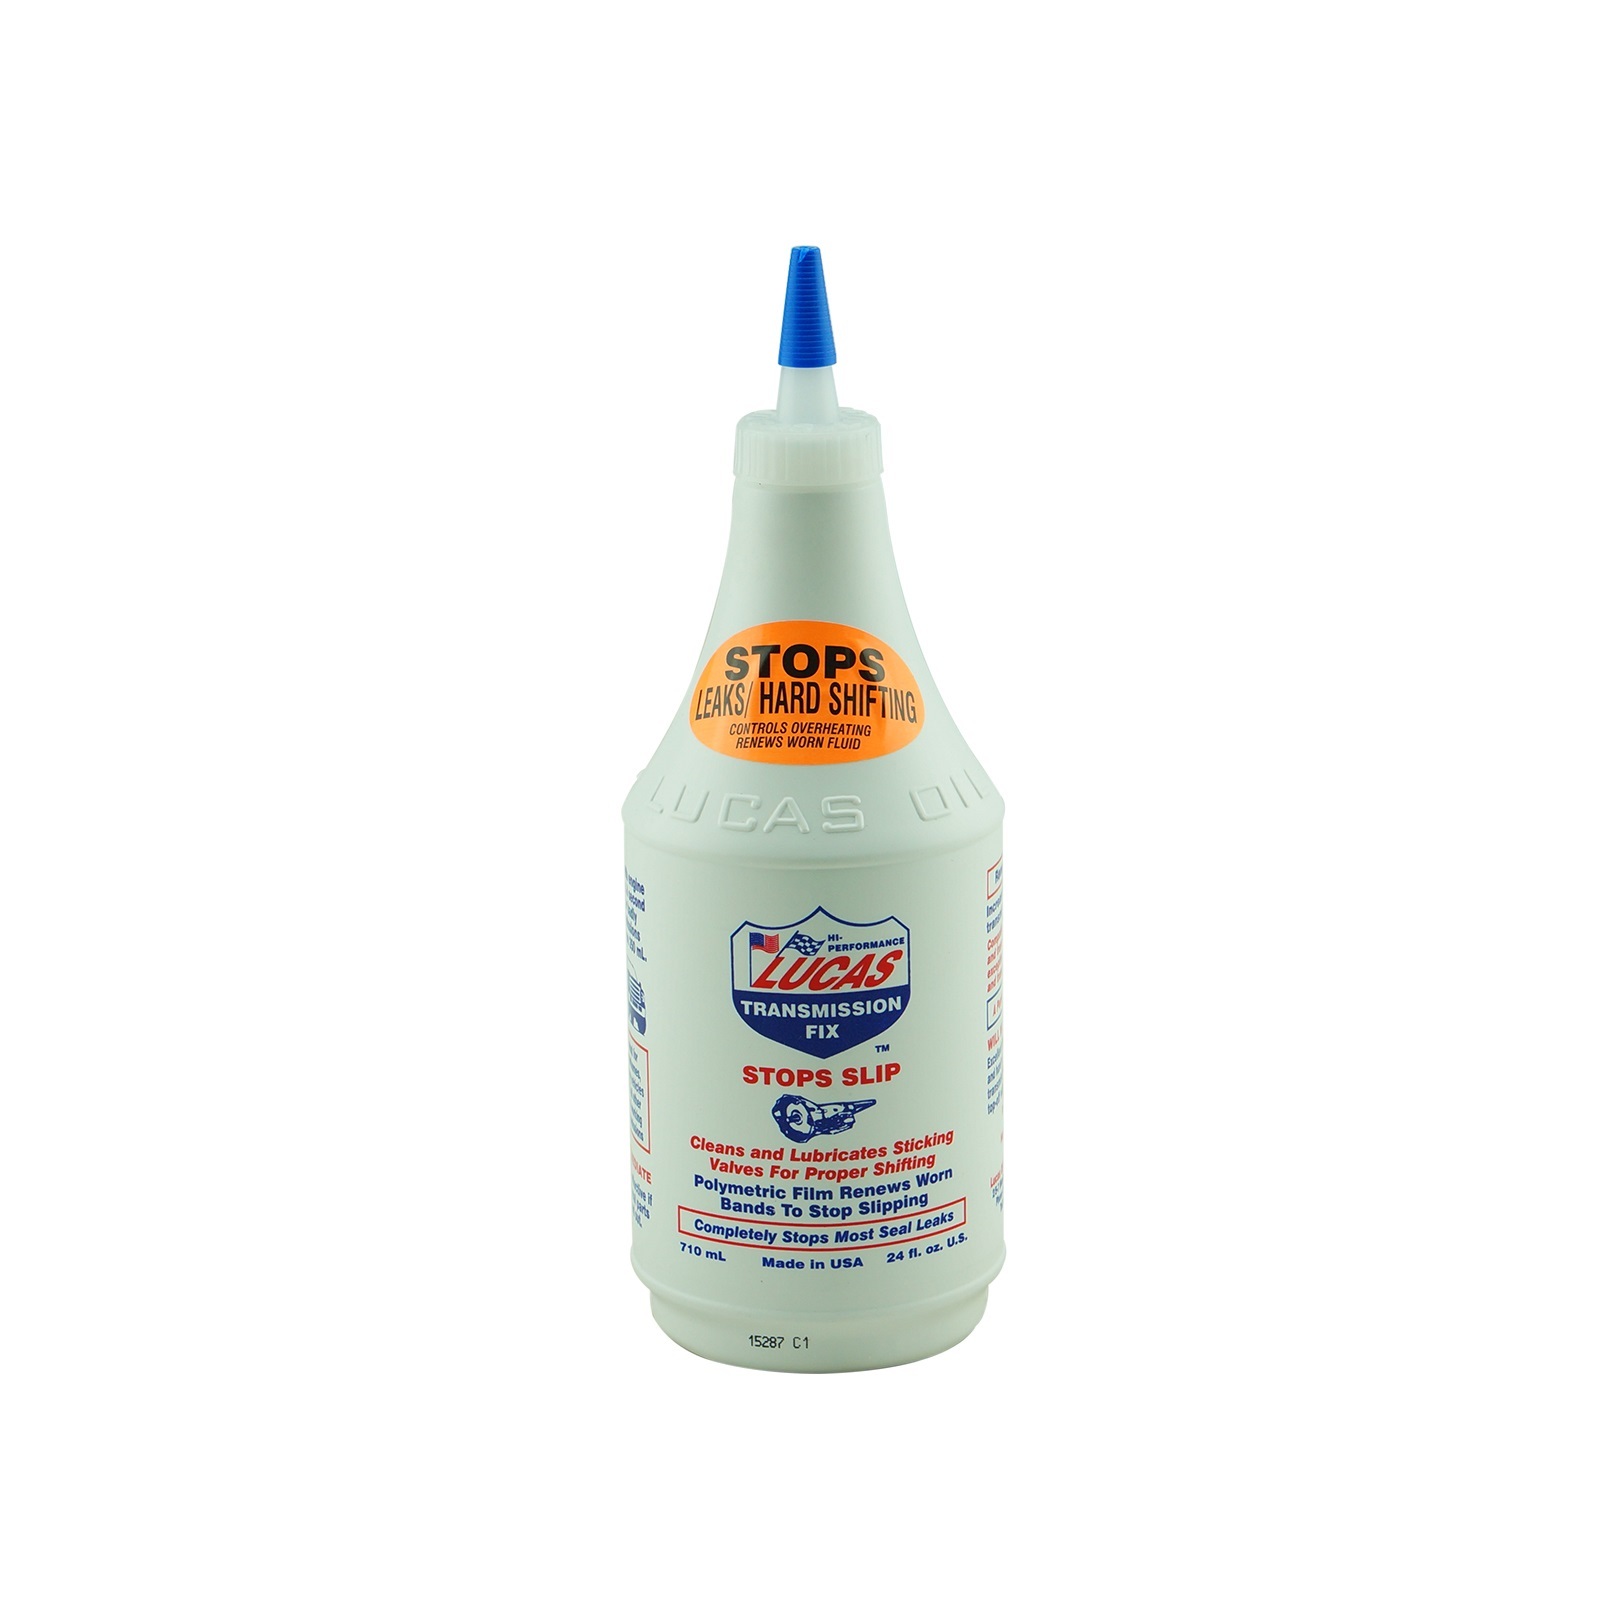 Lucas Transmission Fix - Stops Slip, hesitation and rough shifting 710ml